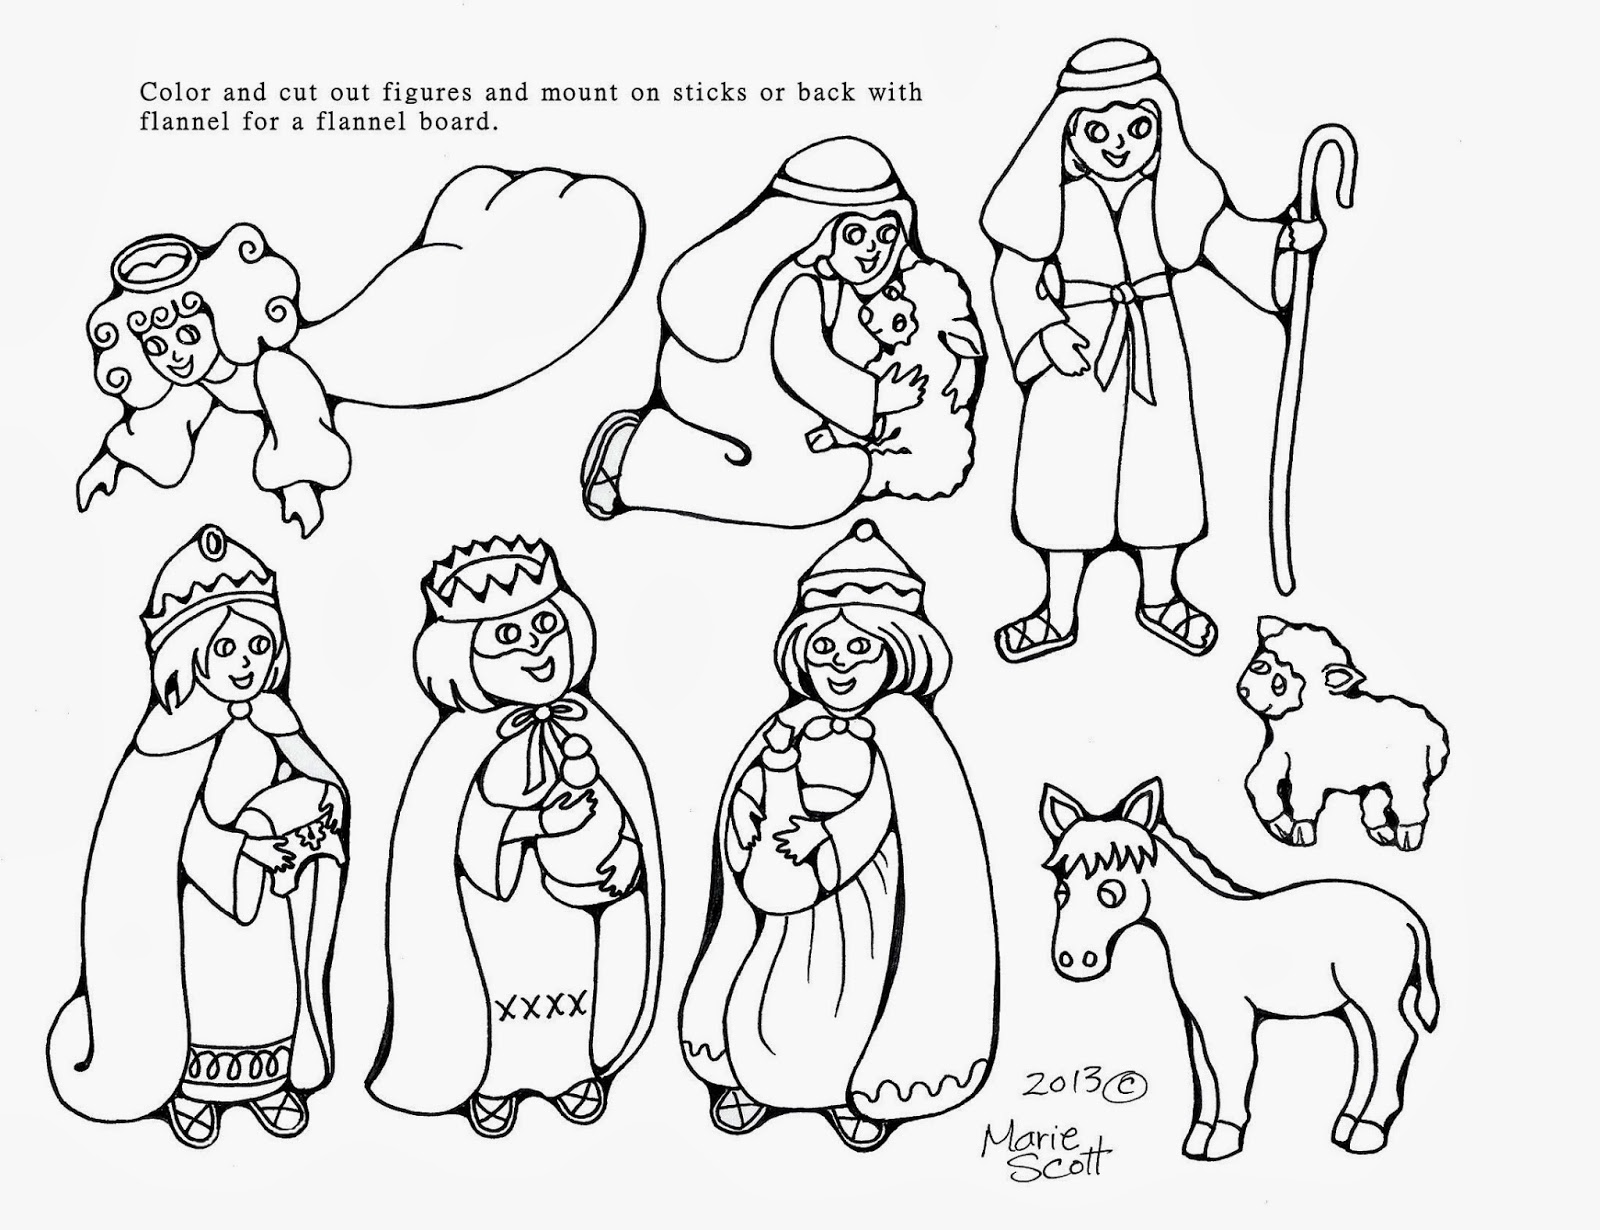 printable-nativity-scene-cut-out